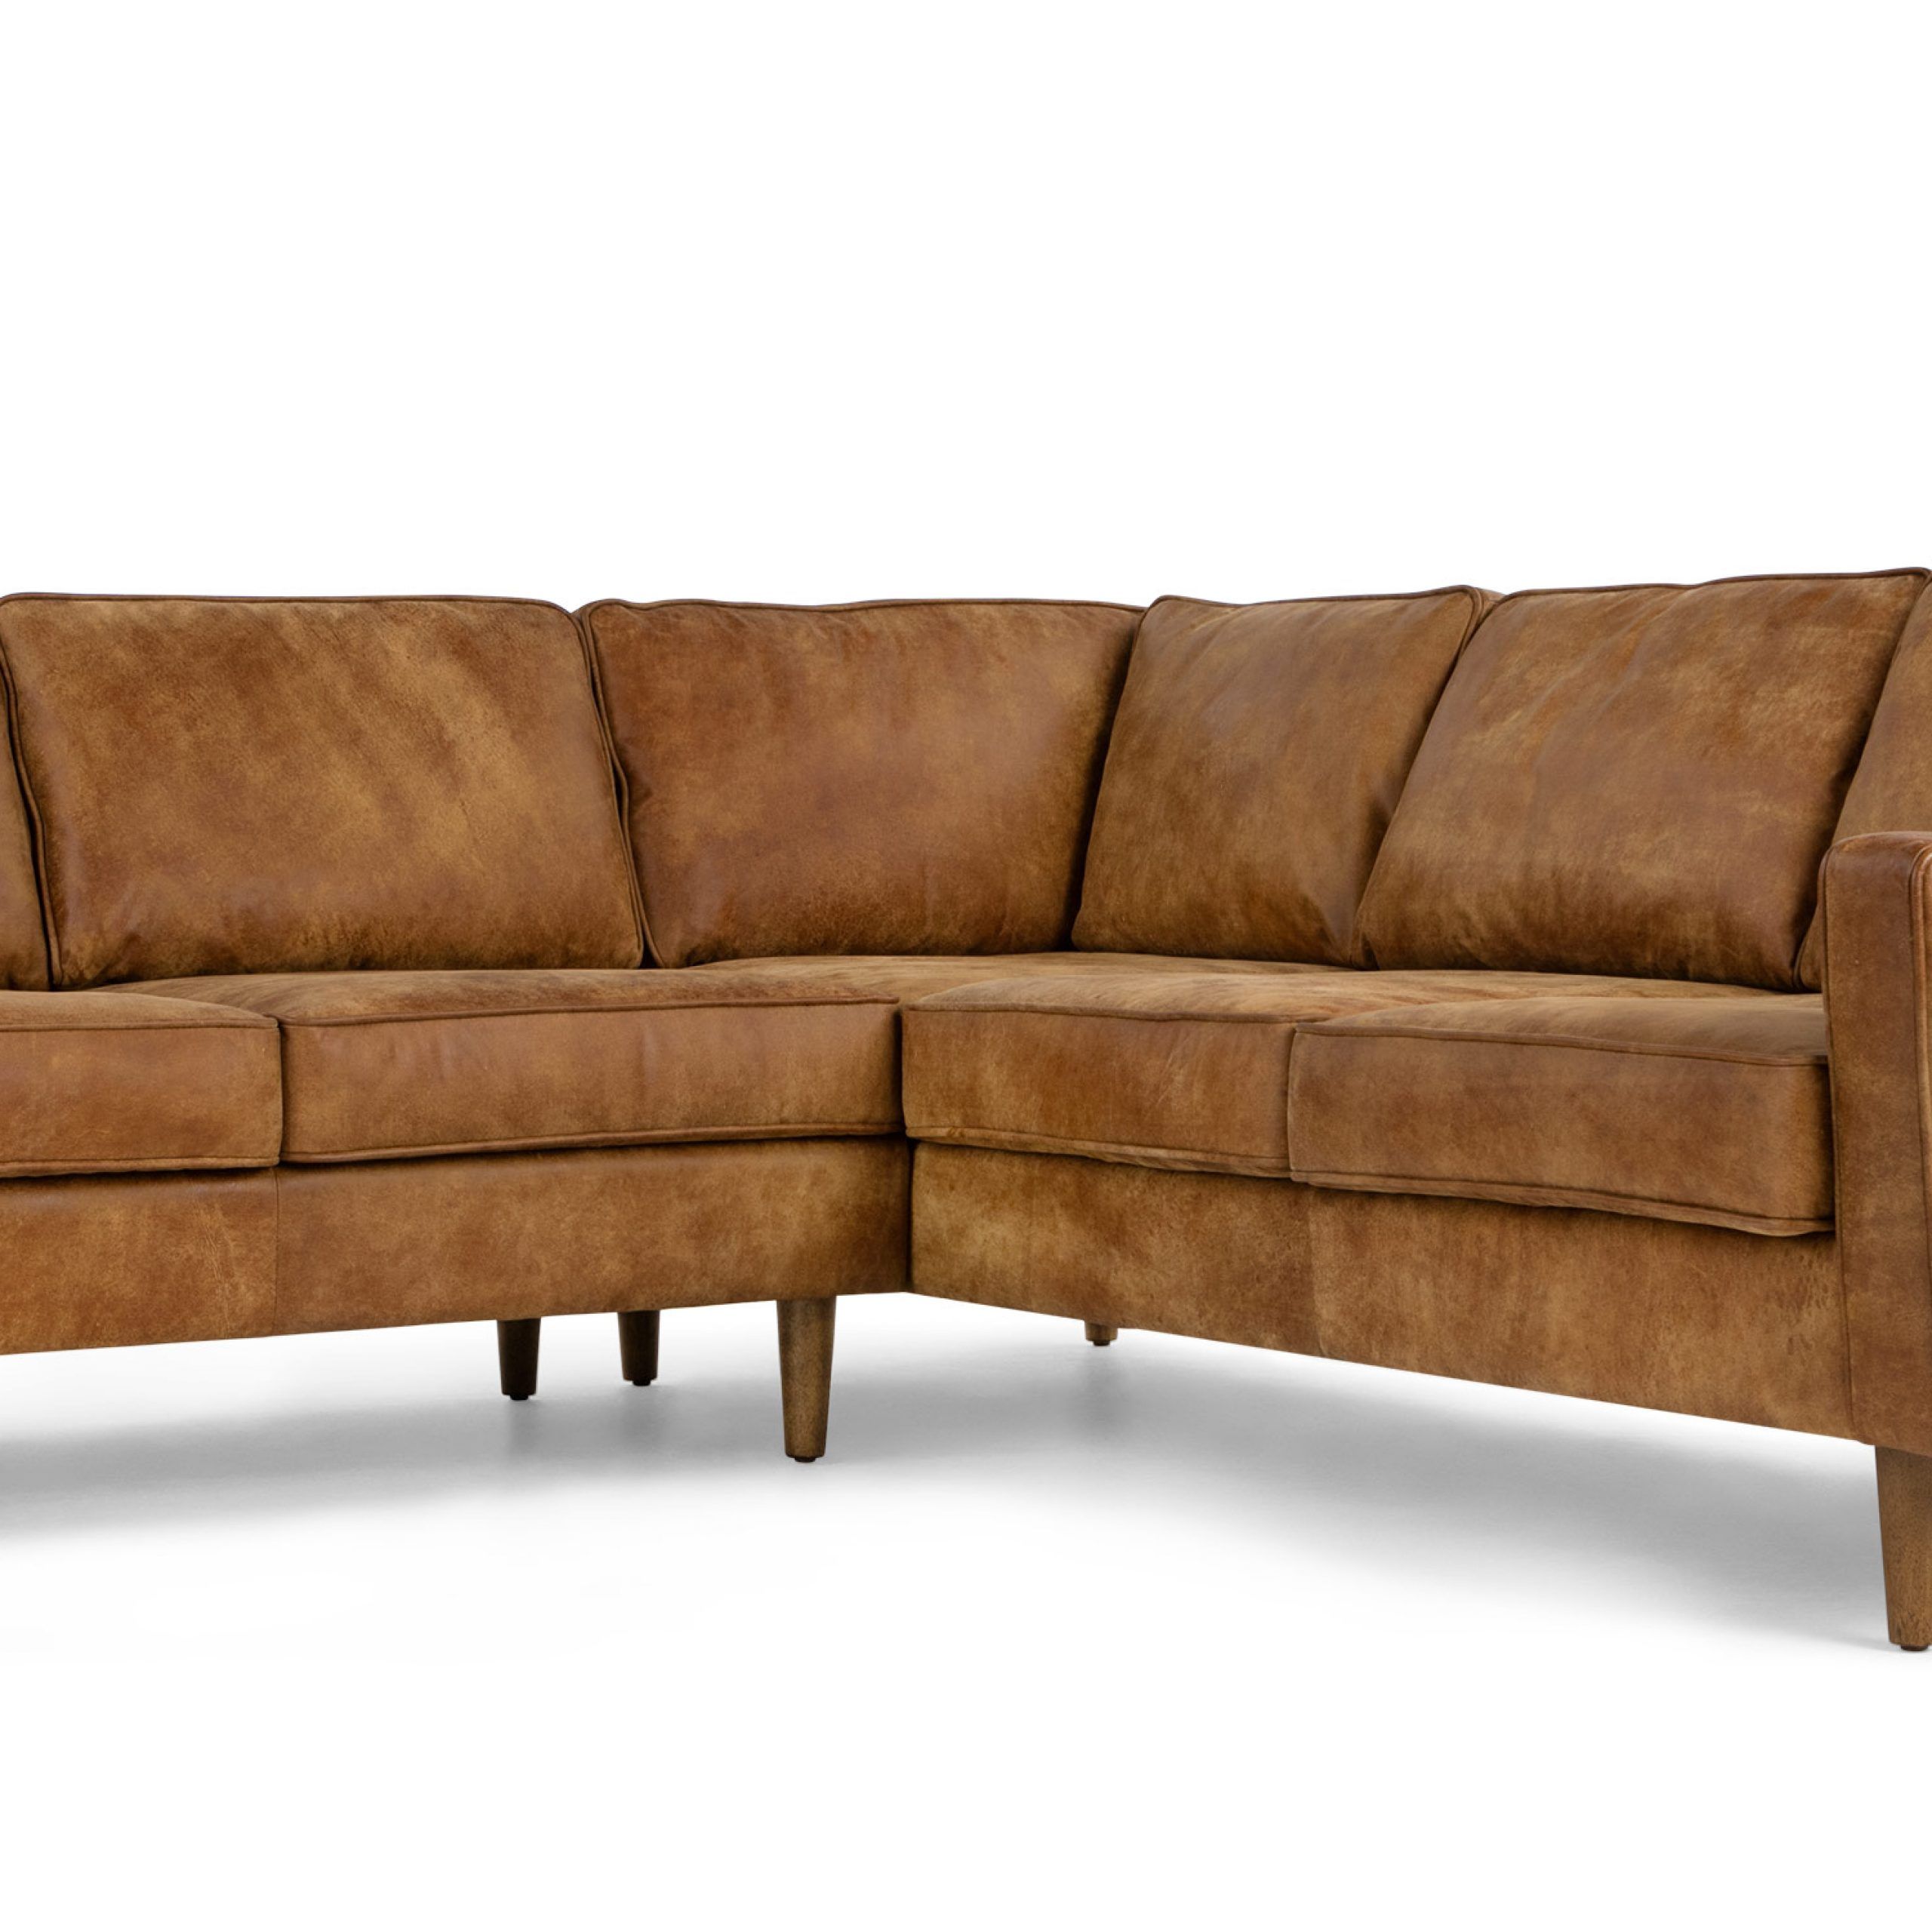 Dallas Corner Sofa, Outback Tan Premium Leather | Made With Leather Corner Sofas (View 14 of 15)